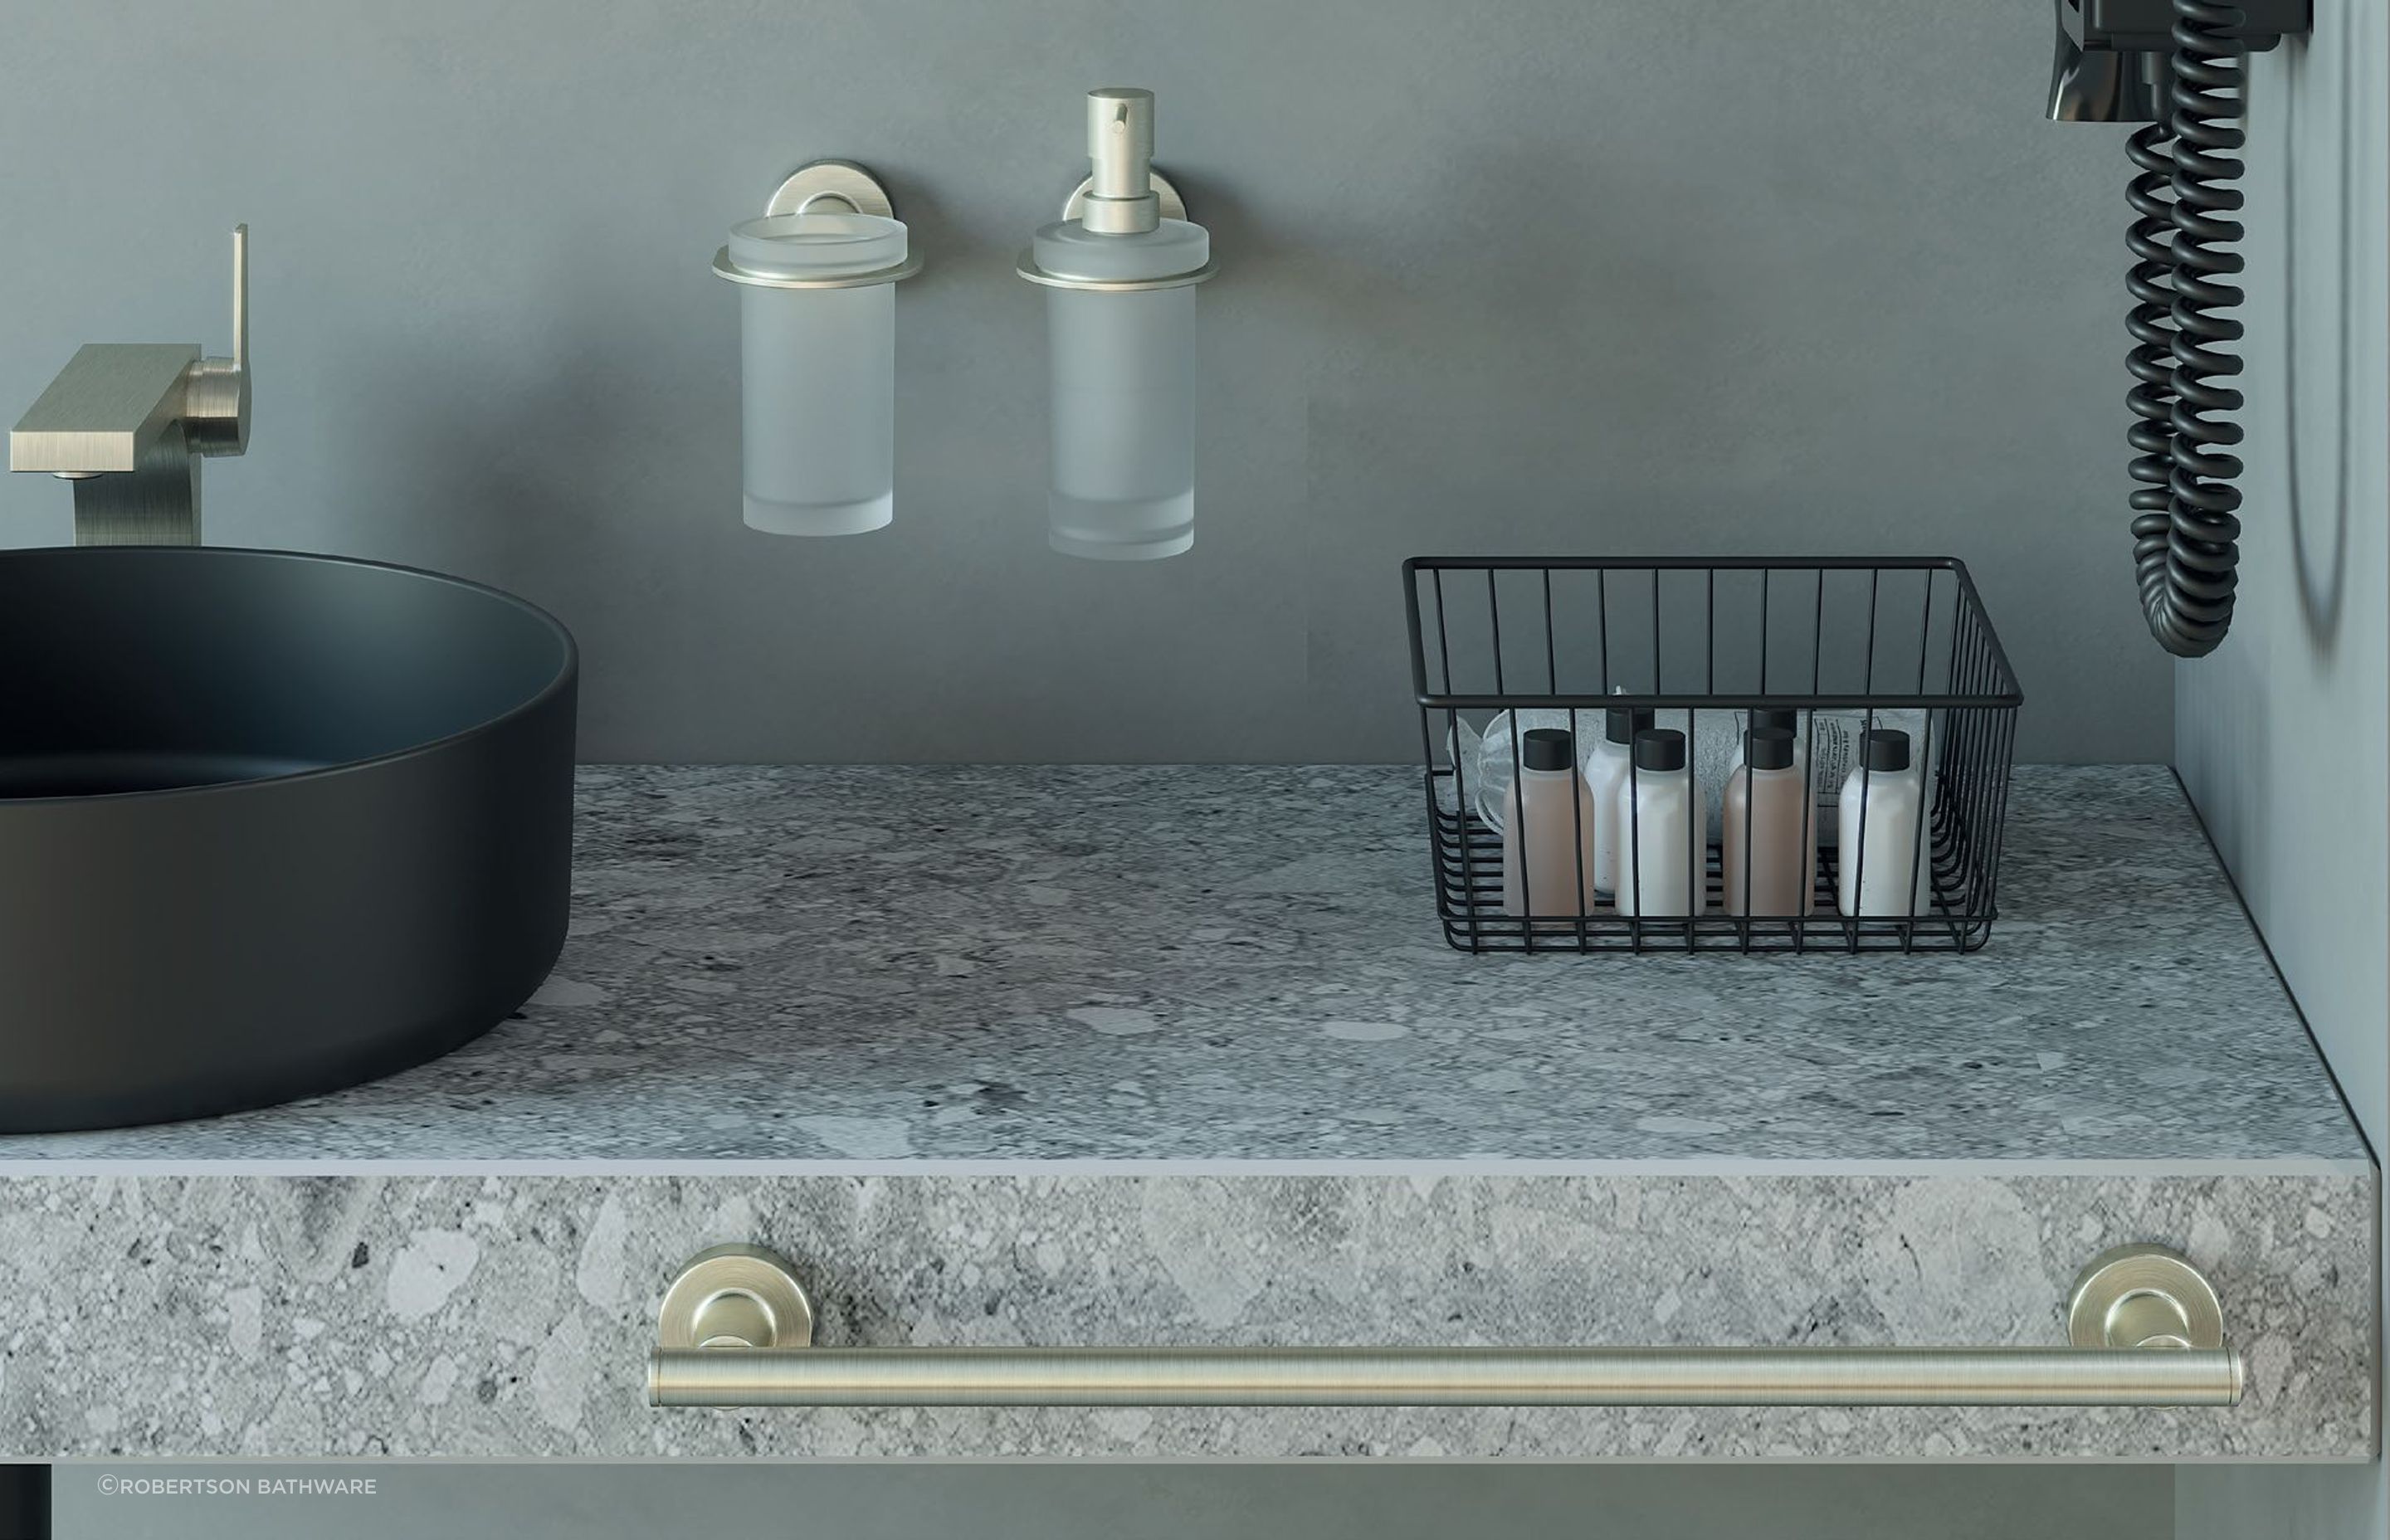 Minimalist styling can be achieved with sleek soap dispensers like this from the Elementi Project range.